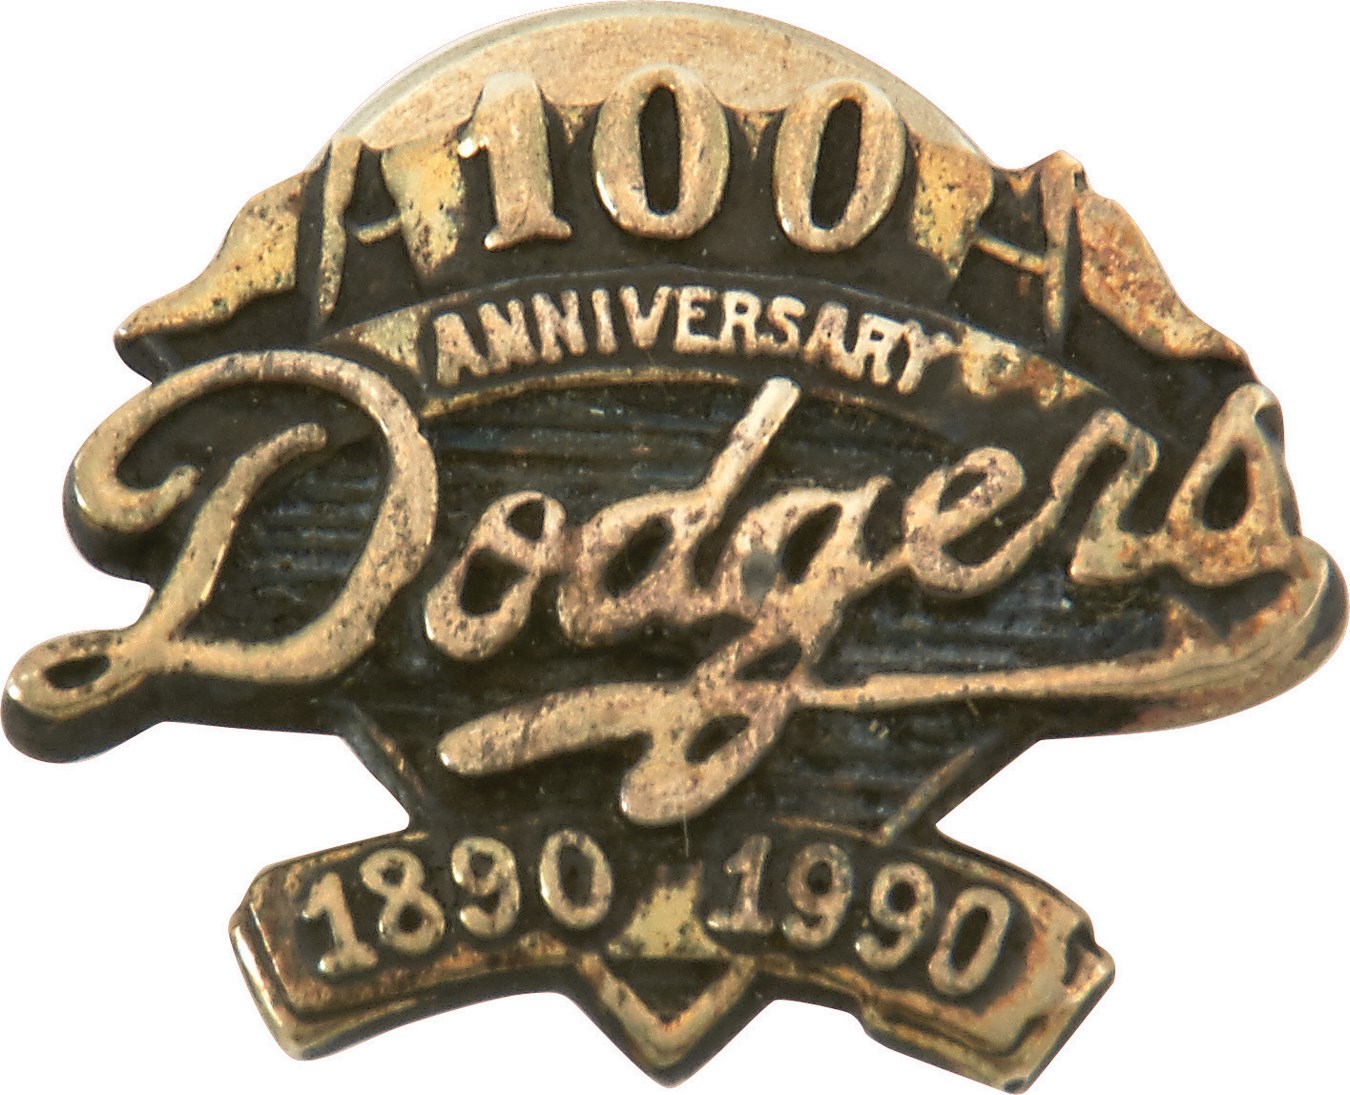 - Dodgers 100th Anniversary Pin by Tiffany Presented to Claude Osteen